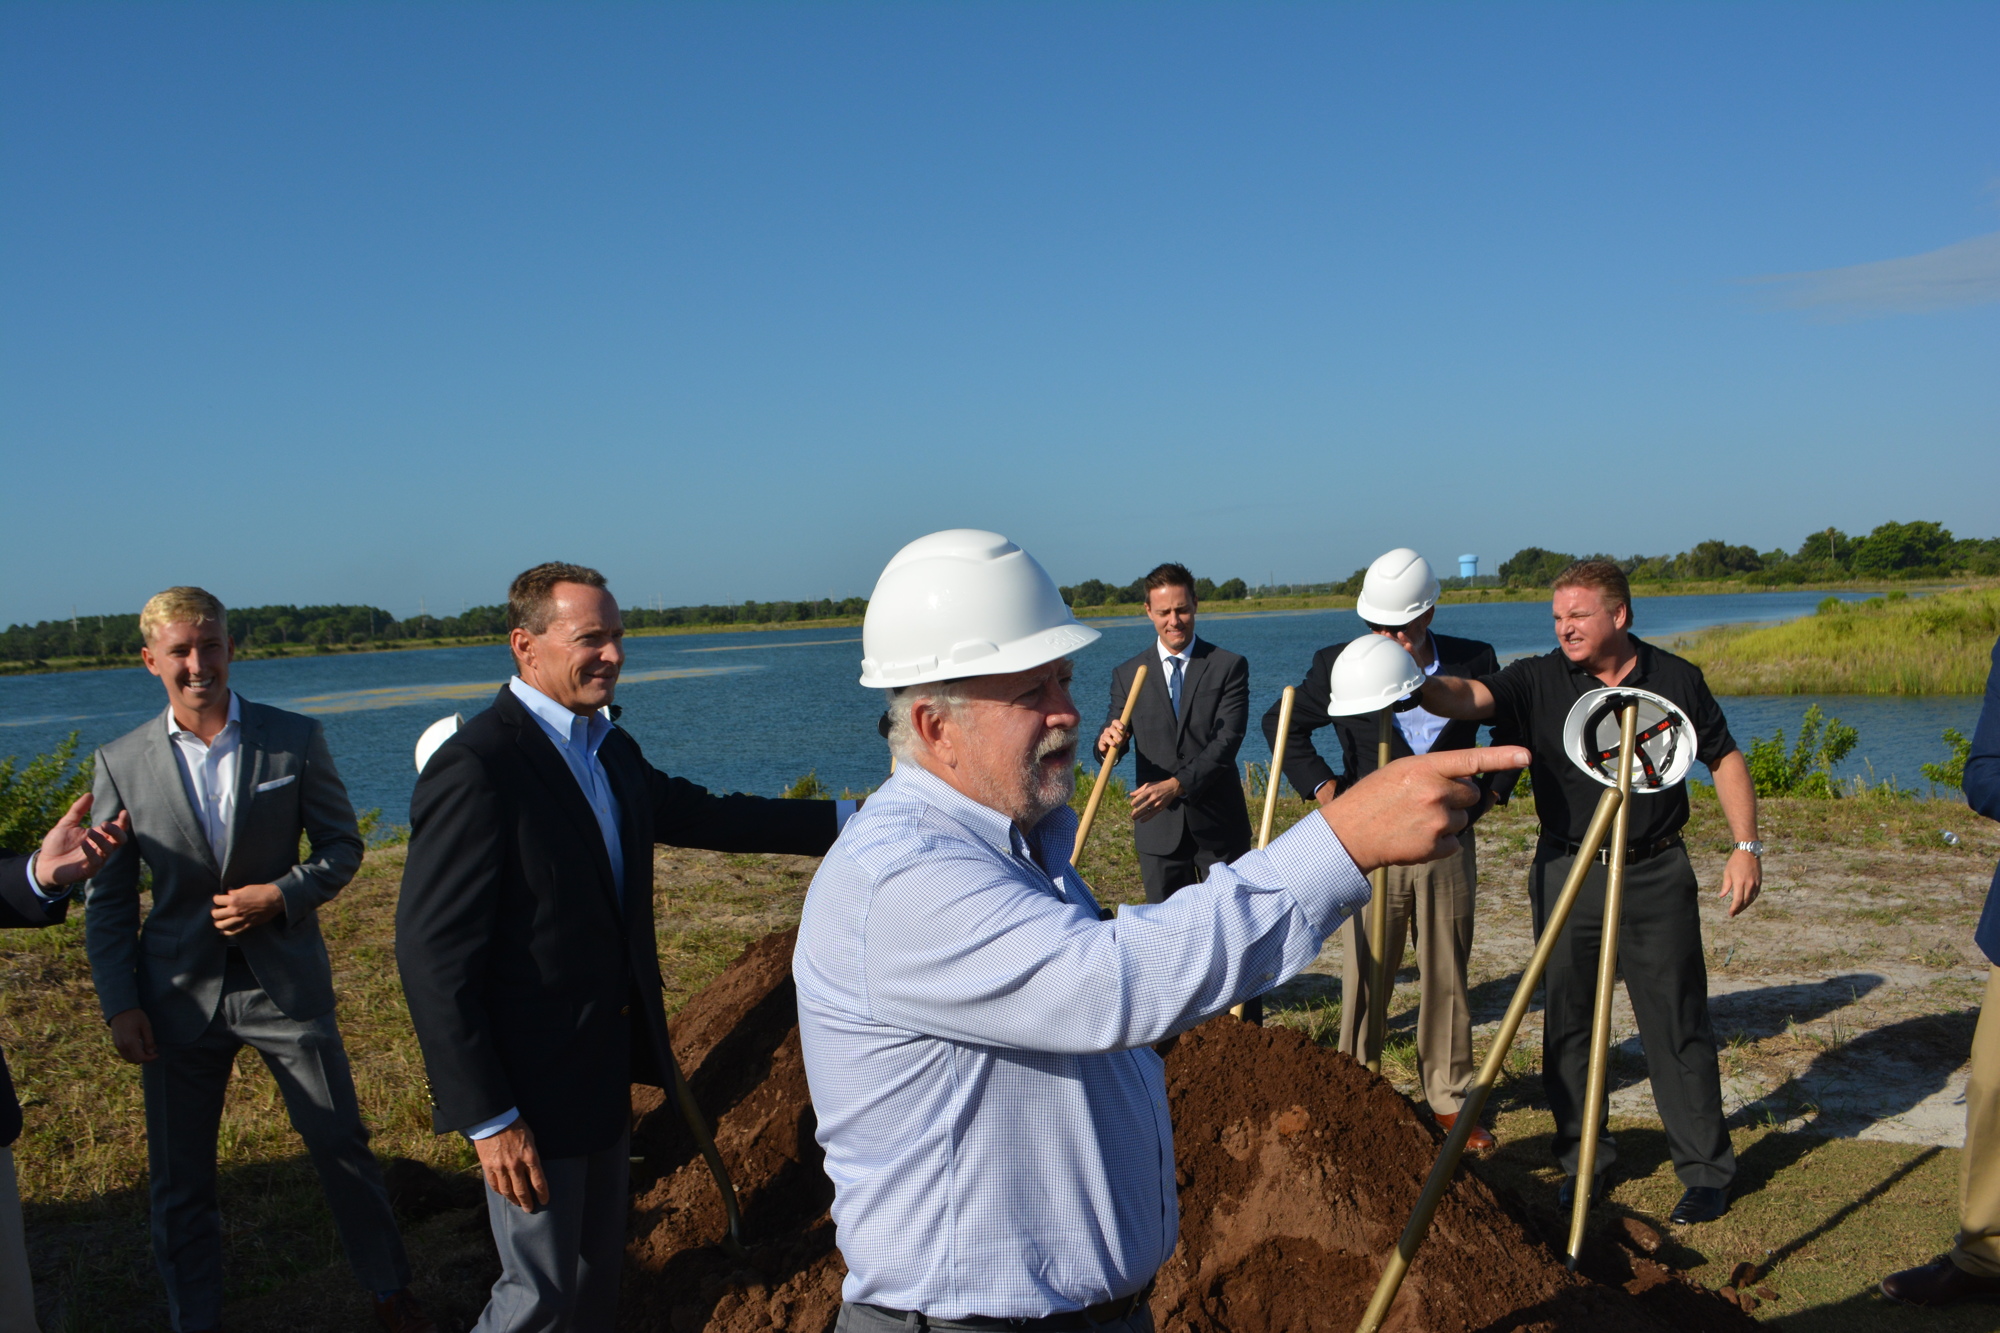 SMR CEO and President Rex Jensen leads a groundbreaking ceremony for Waterside Place.